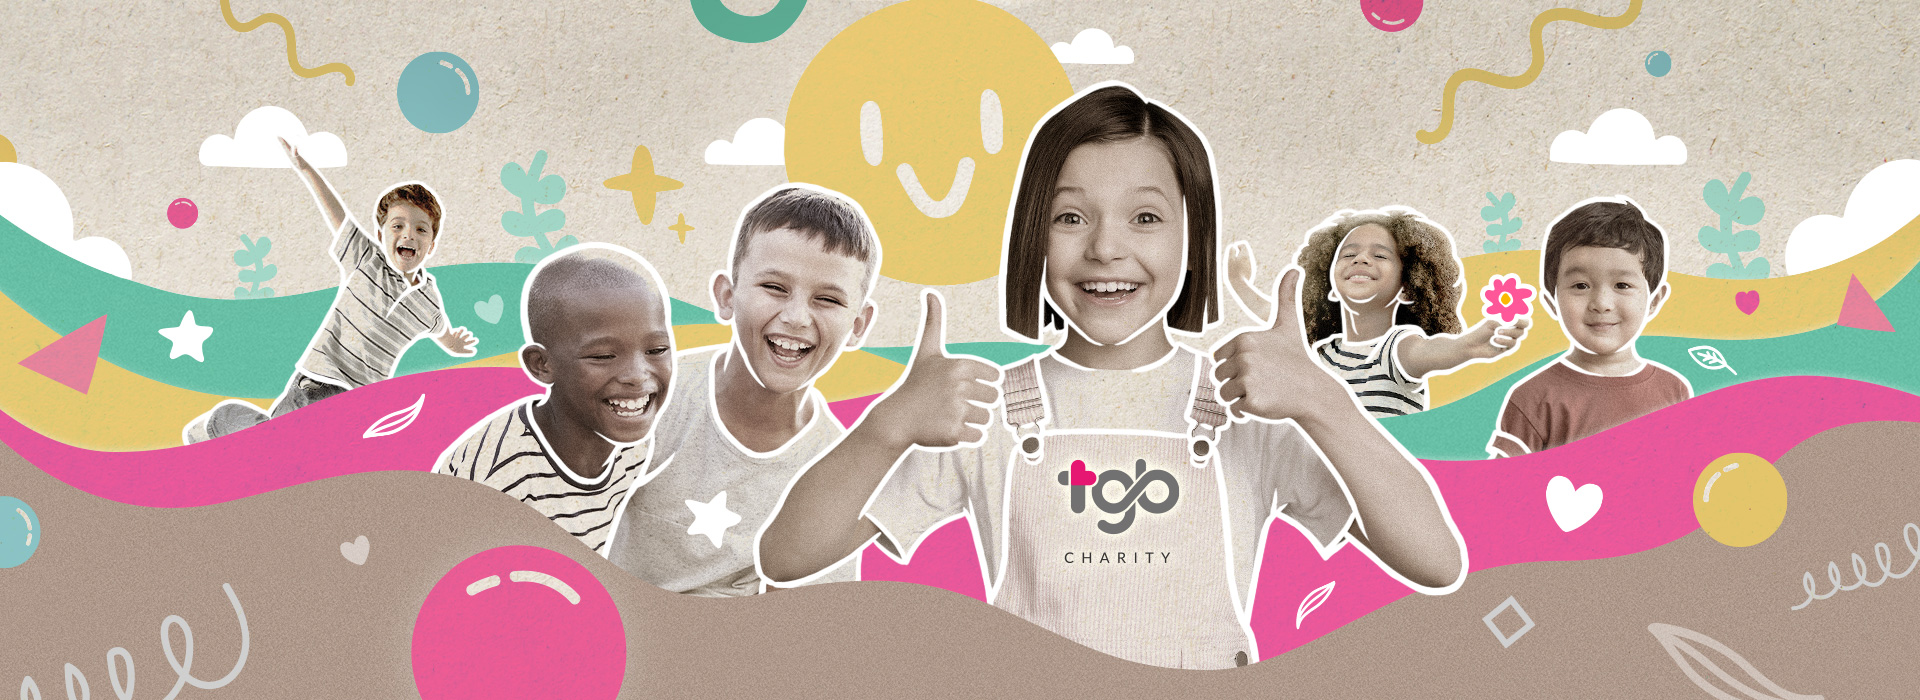 TGB Charity: Get to know what vulnerable children need in the video!